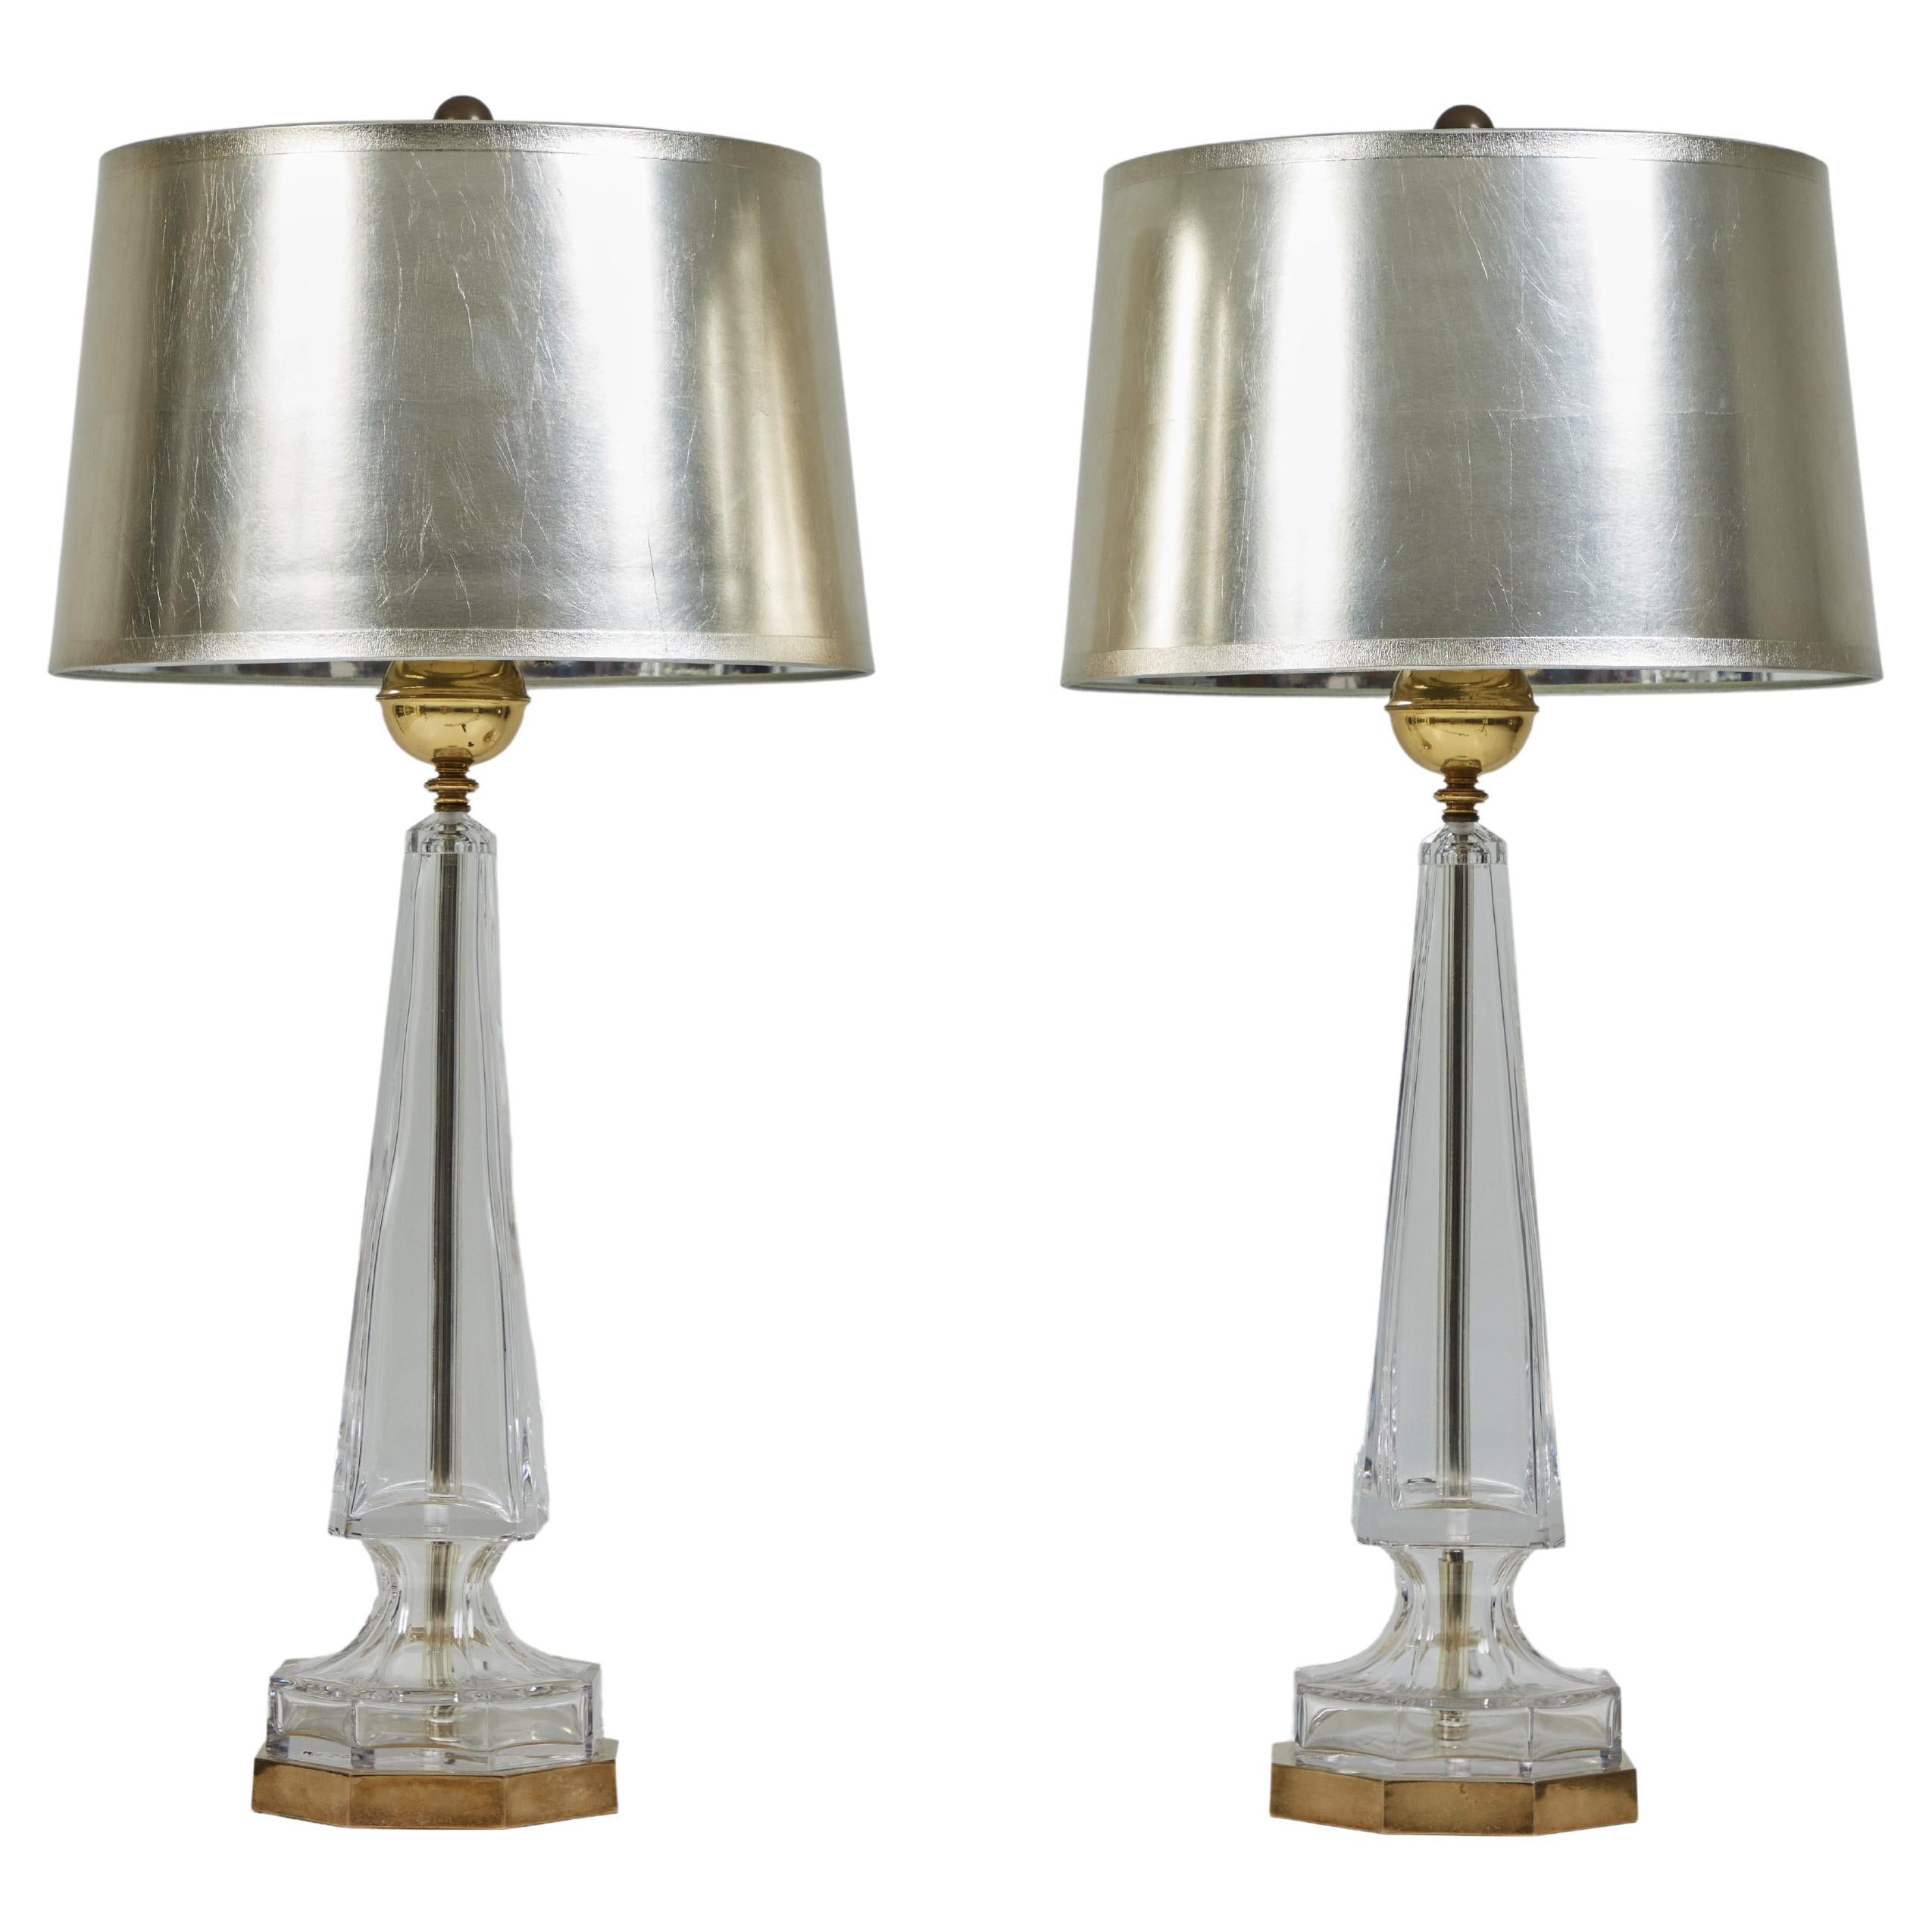 A Pair of Crystal Obelisk Lamps with Silver Leafed Shades, Chapman Lamps 1976 For Sale